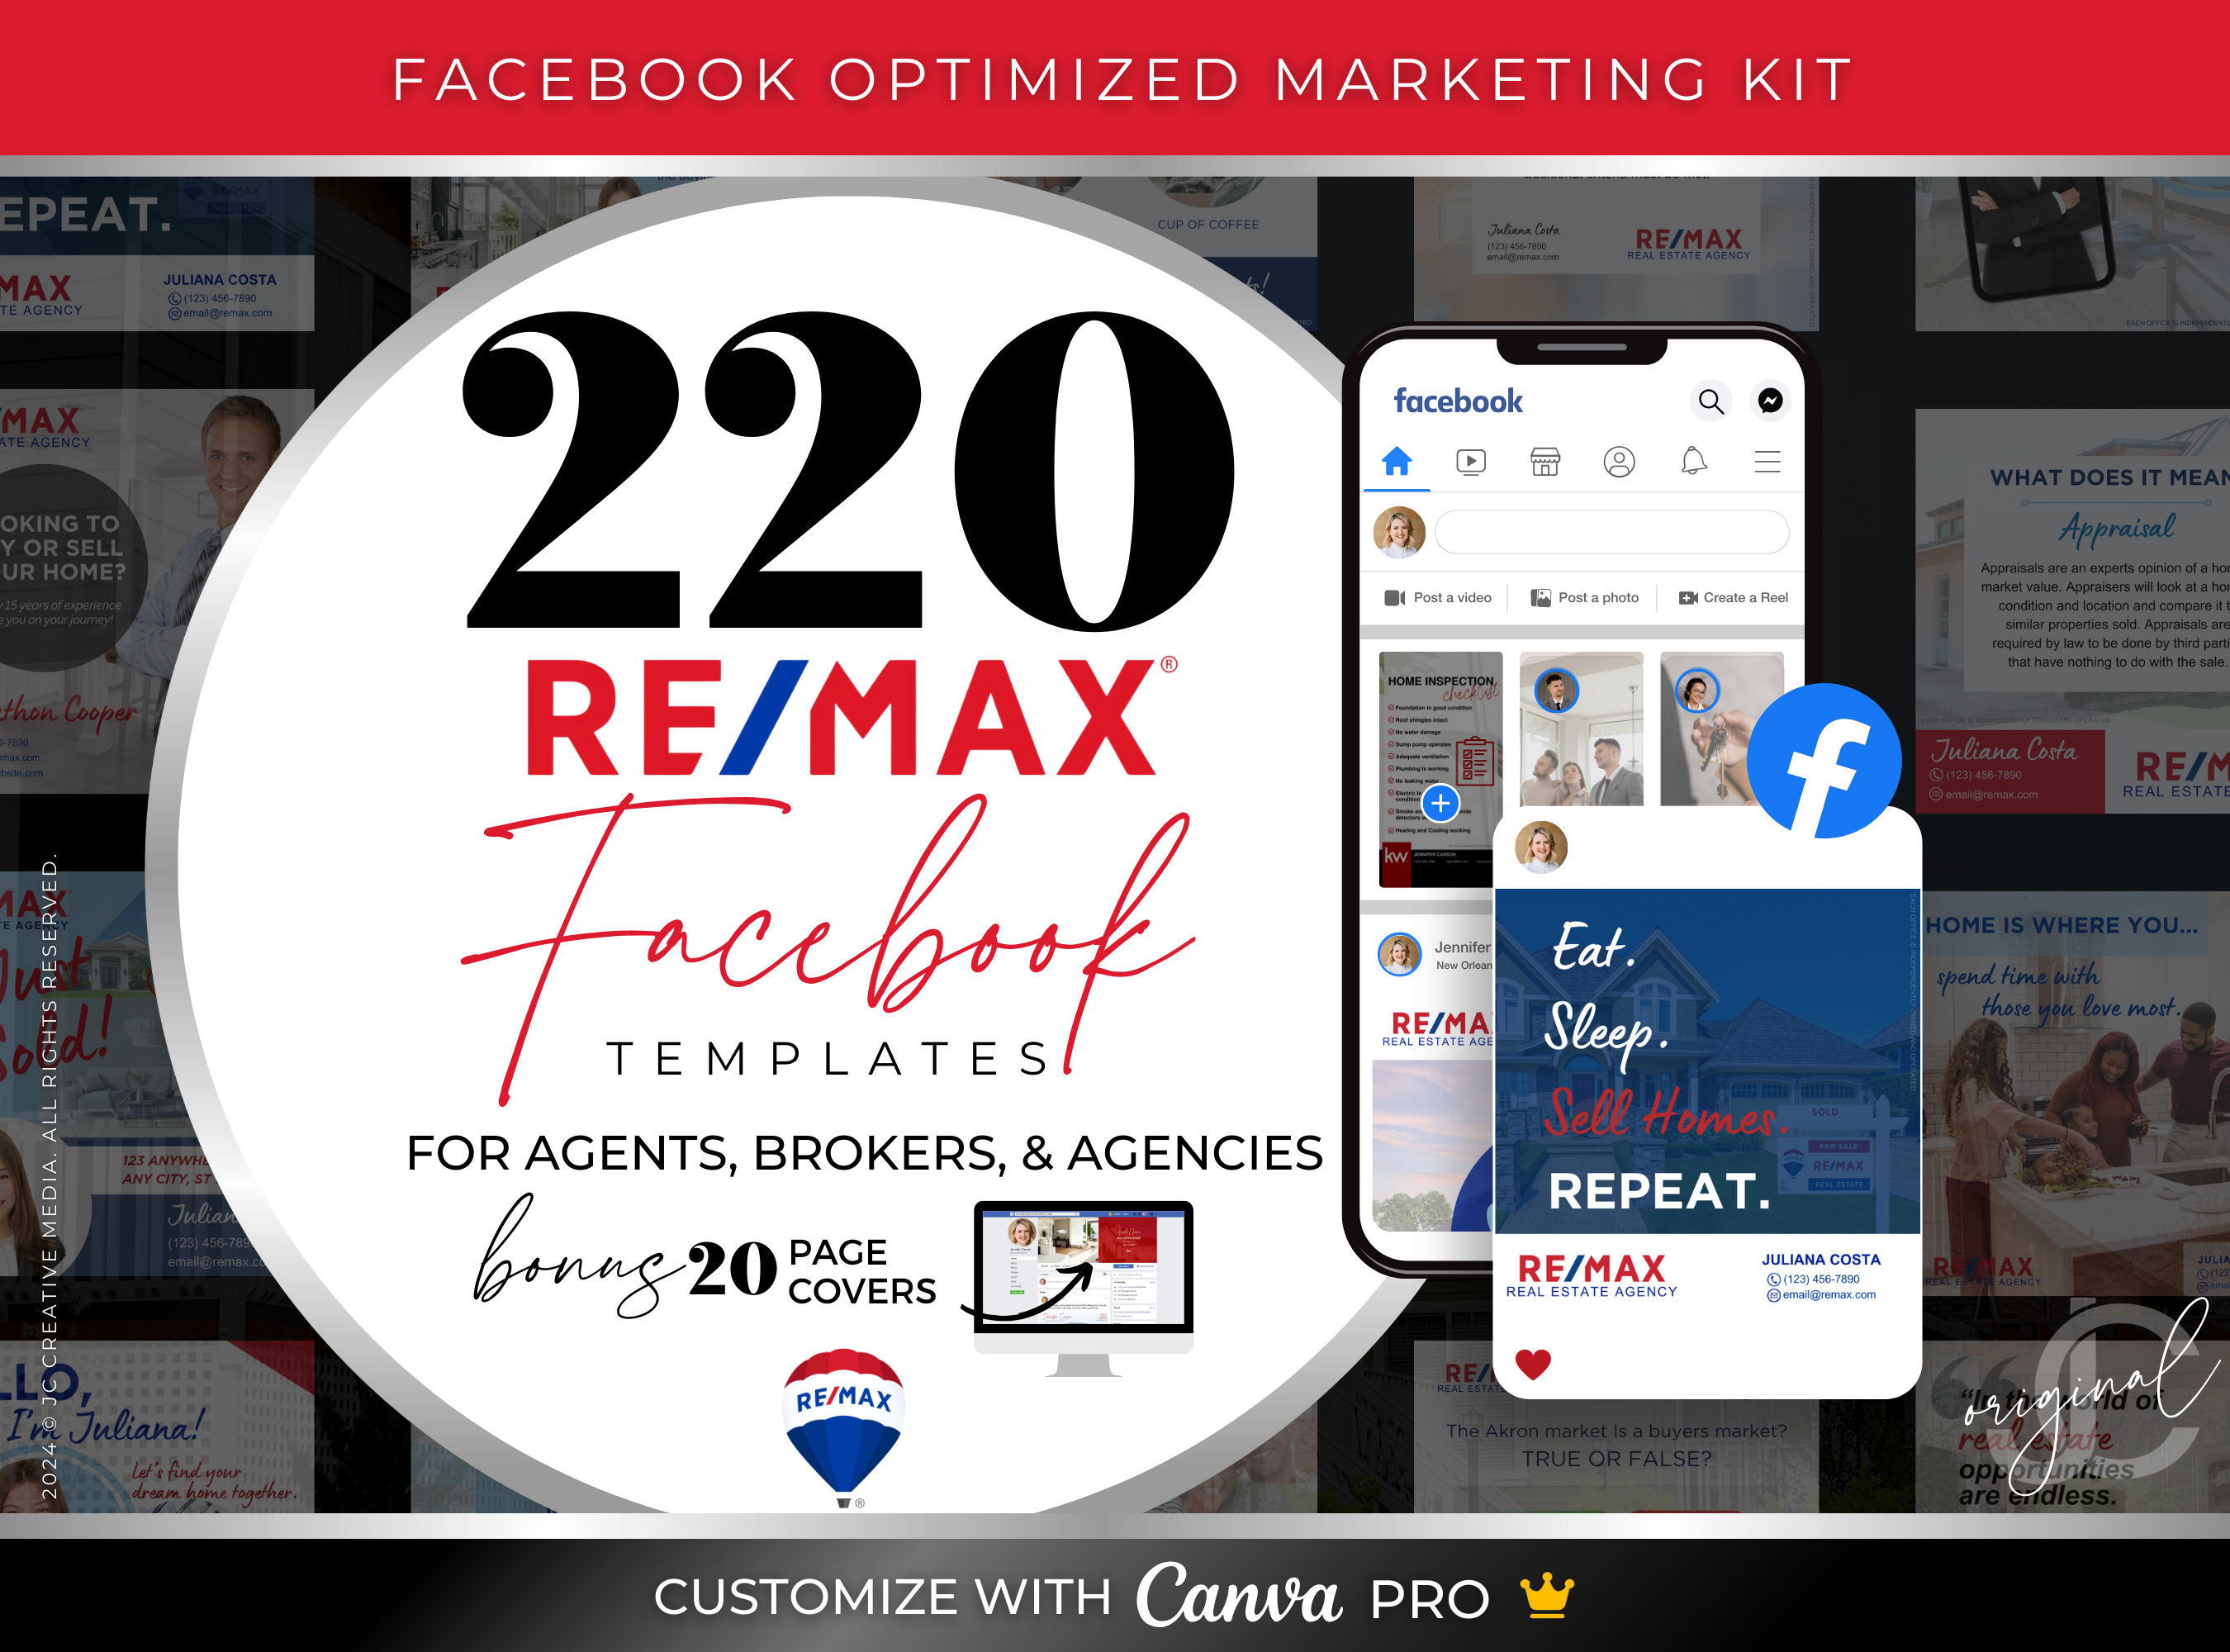 RE/MAX Facebook posts and page cover Canva templates for real estate marketing and branding